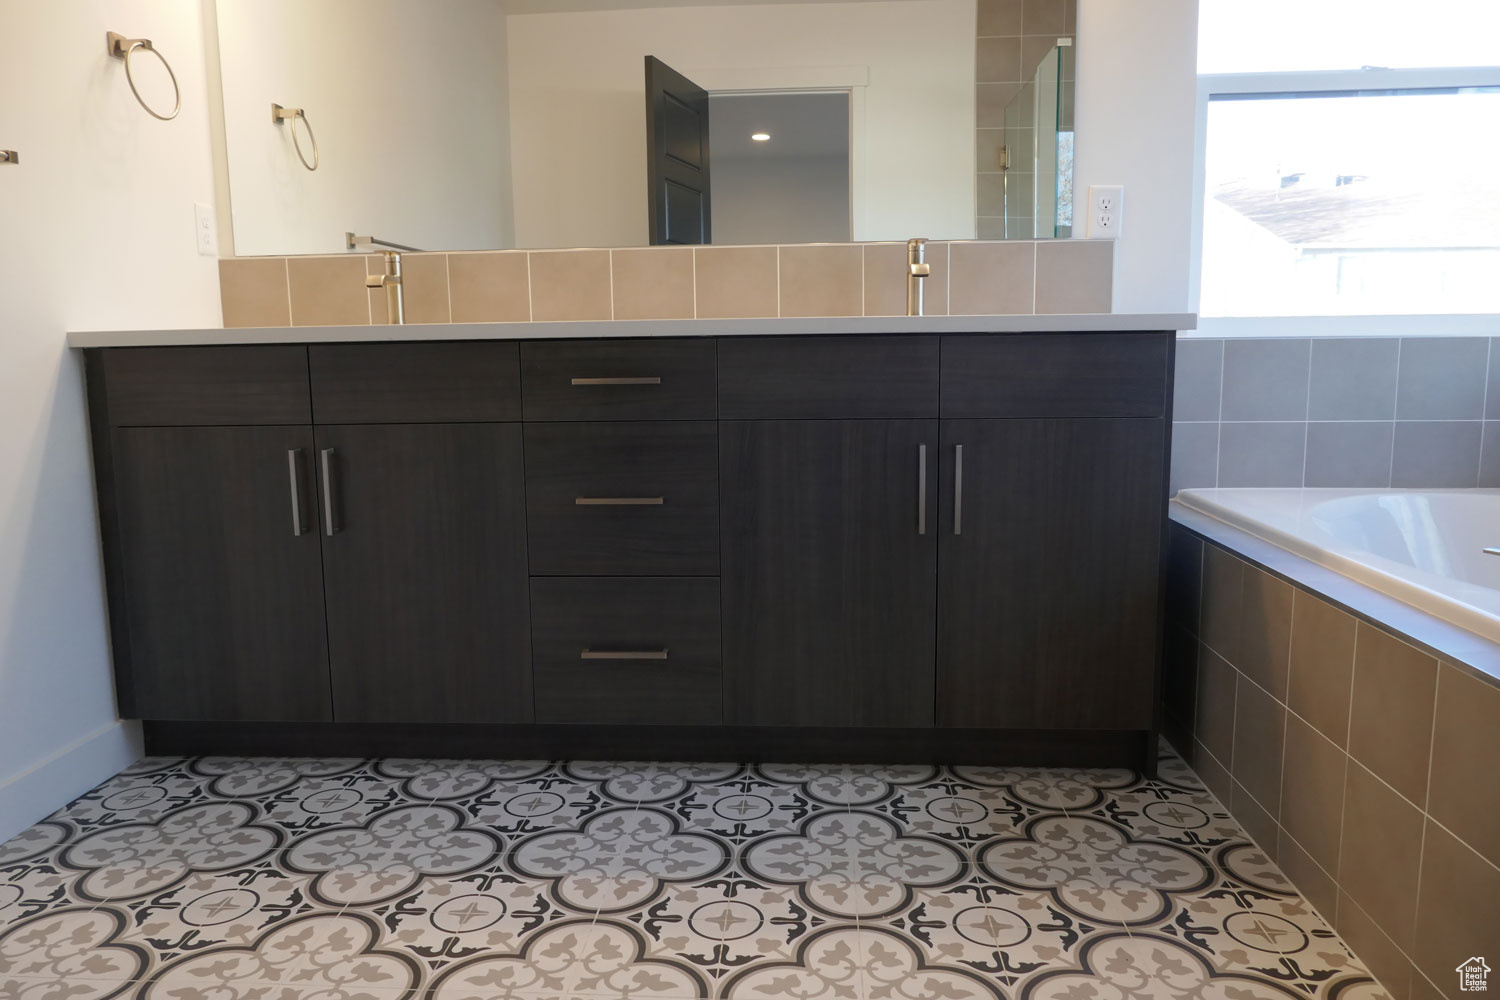 Primary Bathroom with tile flooring, a relaxing tiled bath, and vanity